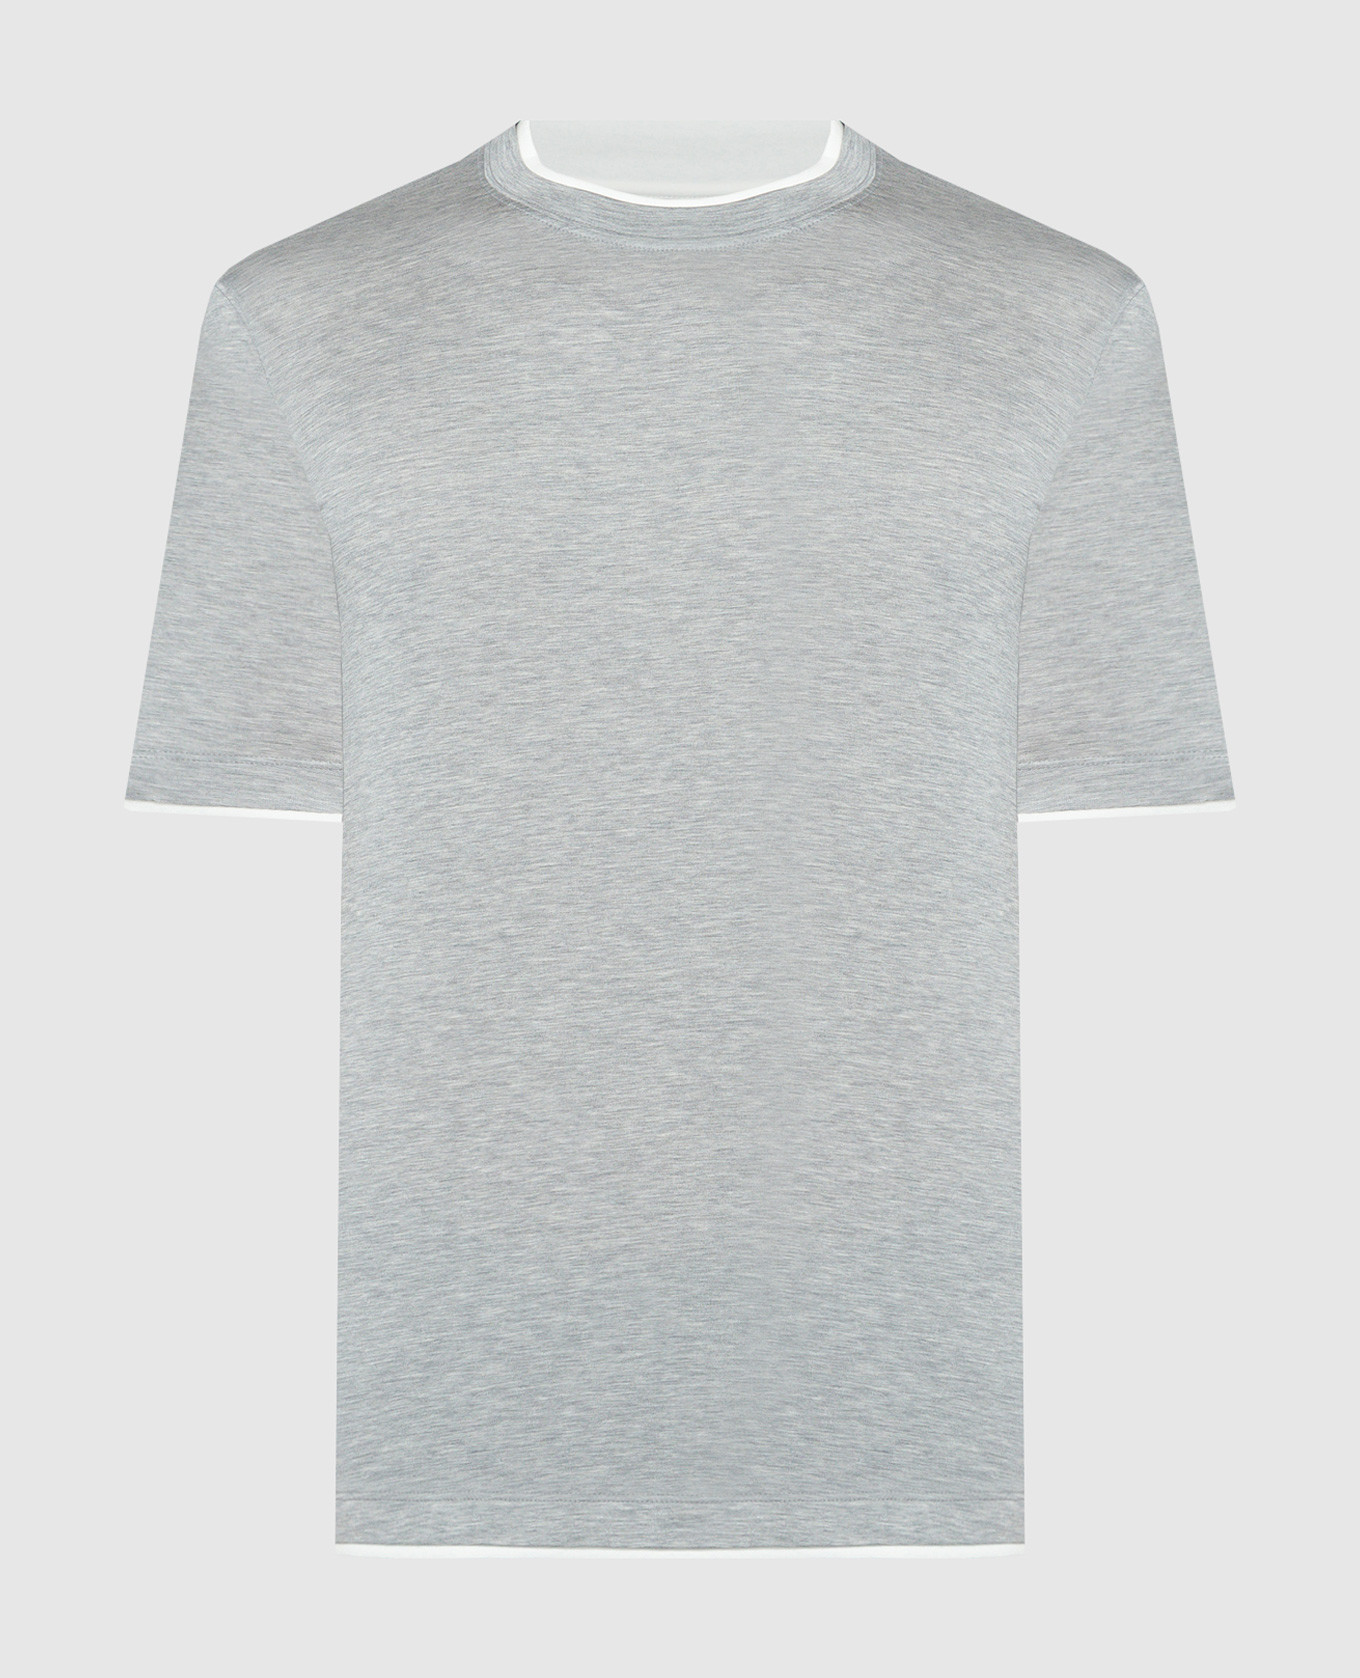 Gray melange t-shirt with layering effect